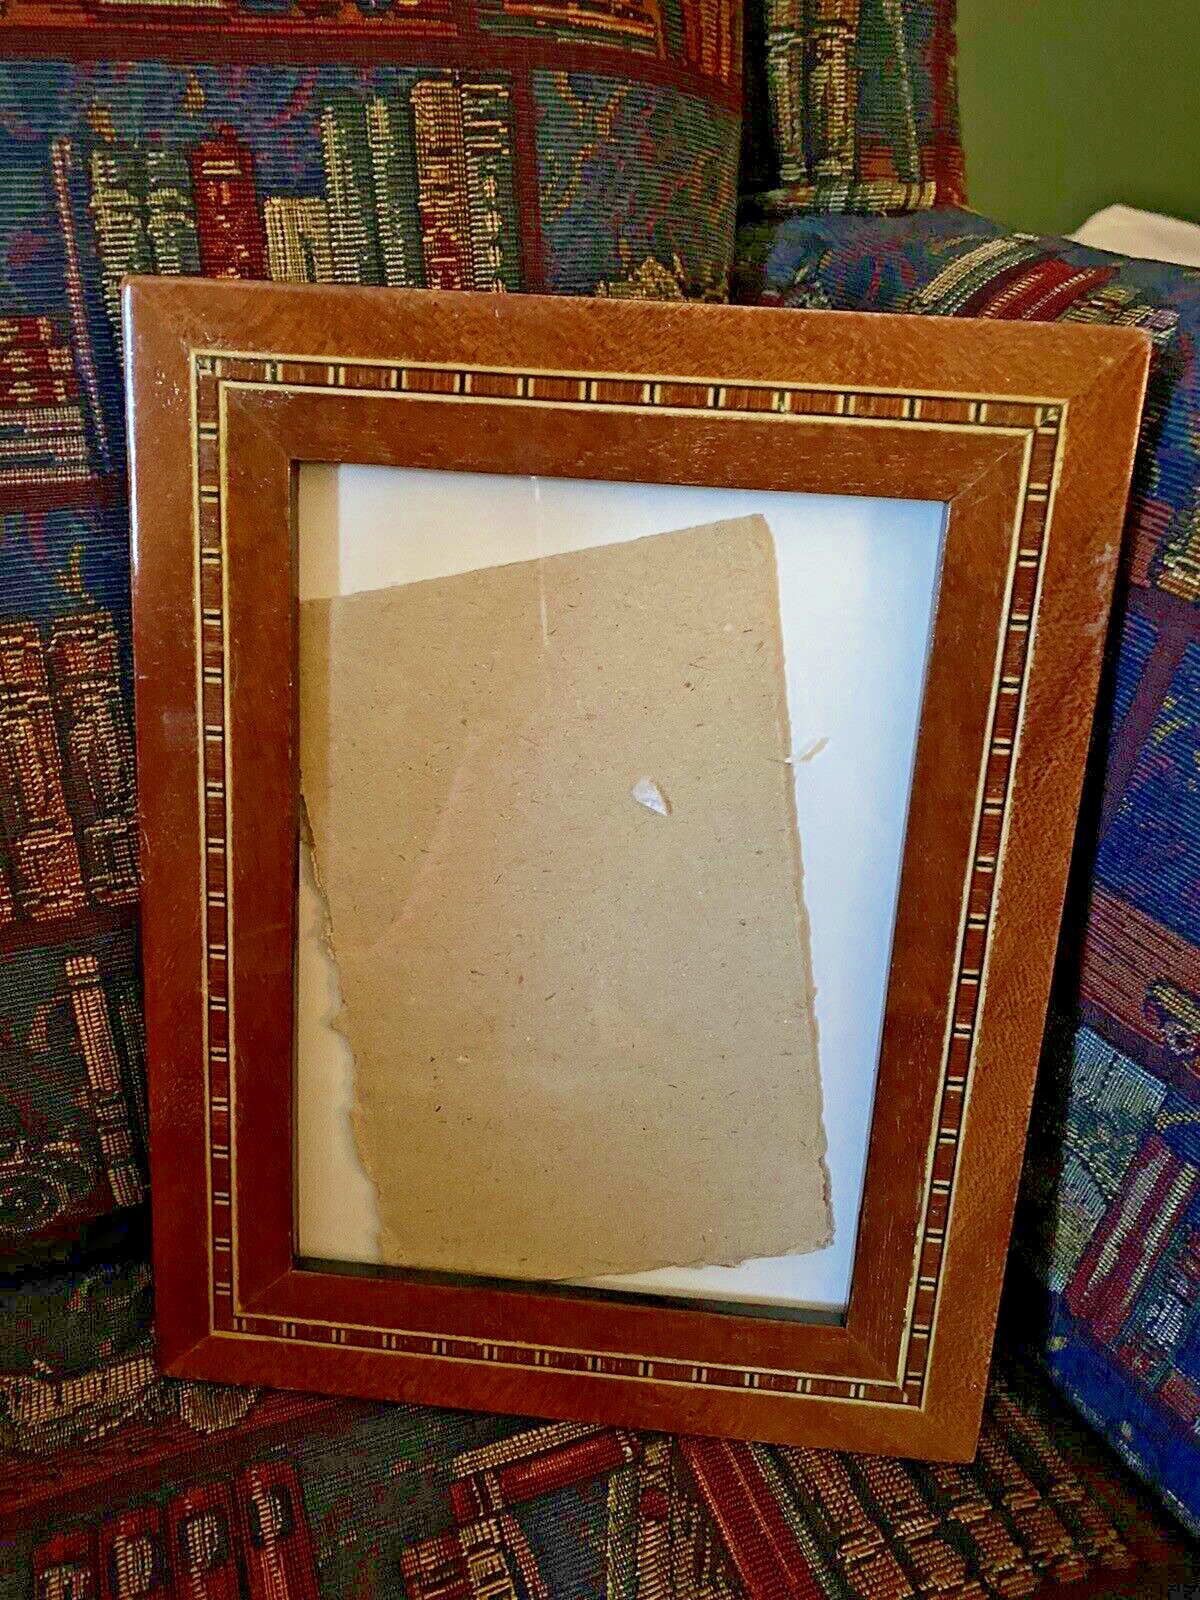 Loui Michel Cie Picture Frame Inlay Wood 5x7 Inlaid Wooden Photo Vintage #11